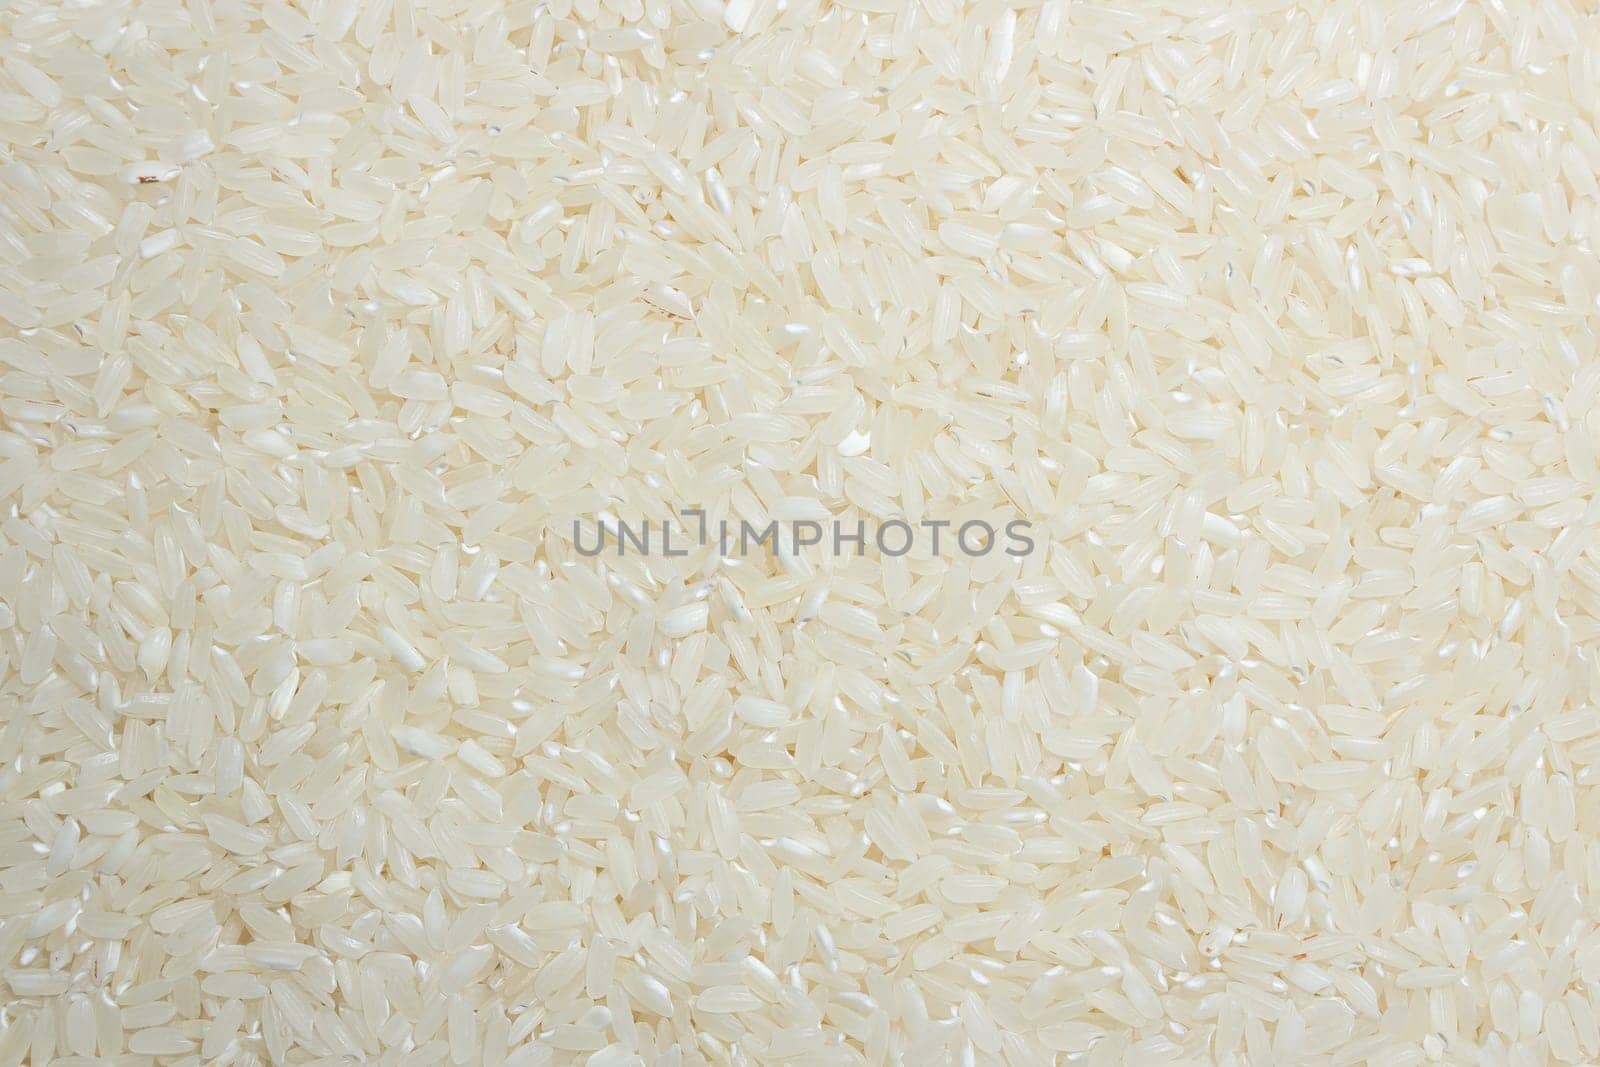 Dry Uncooked White Rice Background by InfinitumProdux